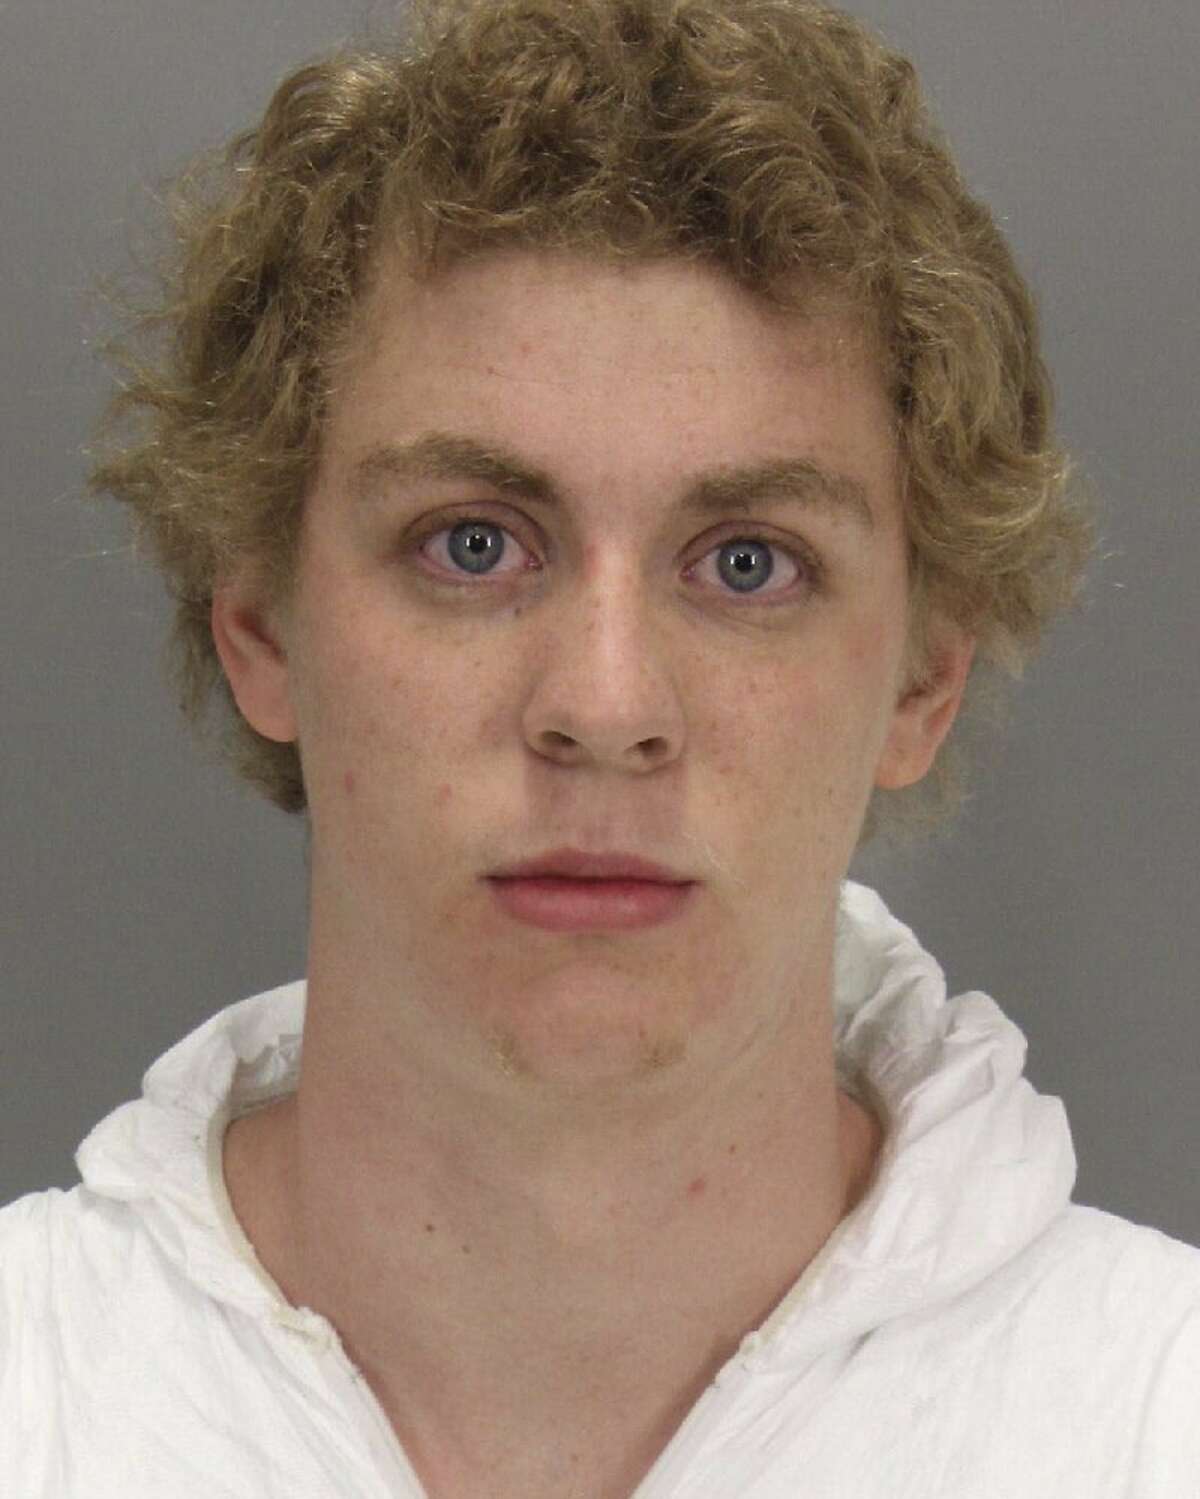 This January 2015 booking photo released by the Santa Clara County Sheriff's Office shows Brock Turner. The former Stanford University swimmer was sentenced last week to six months in jail and three years' probation for sexually assaulting an unconscious woman, sparking outrage from critics who say Santa Clara County Judge Aaron Persky was too lenient on a privileged athlete from a top-tier swimming program.